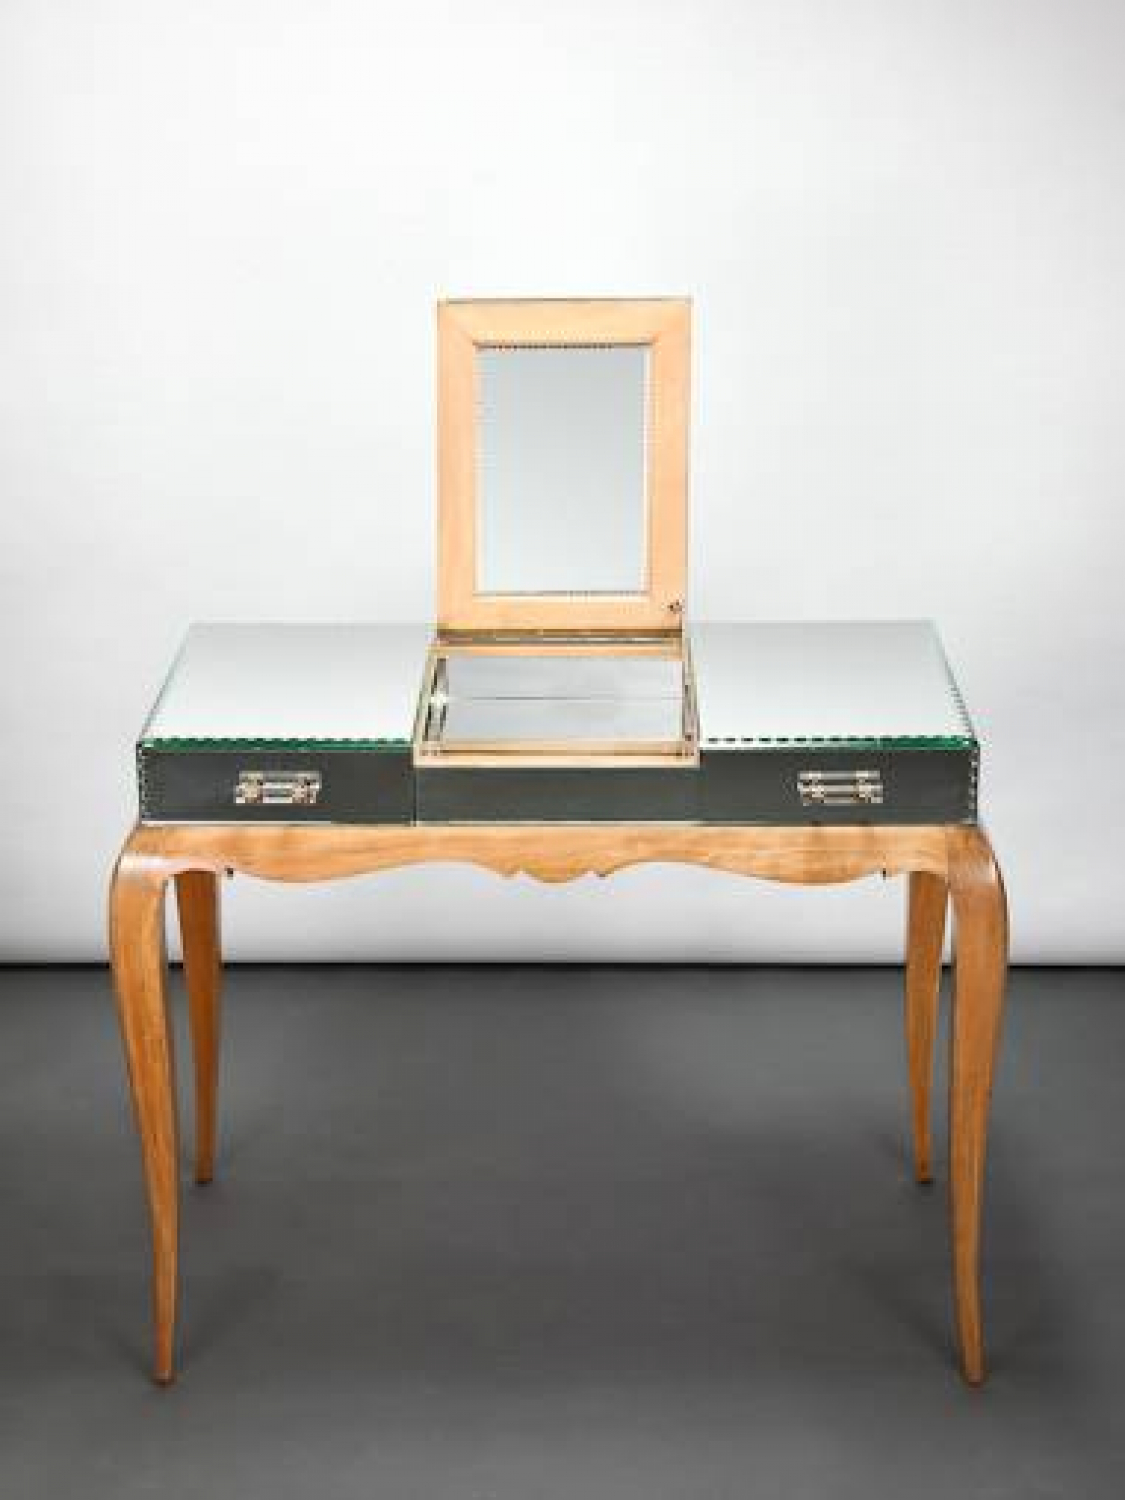 Mirroed dressing table